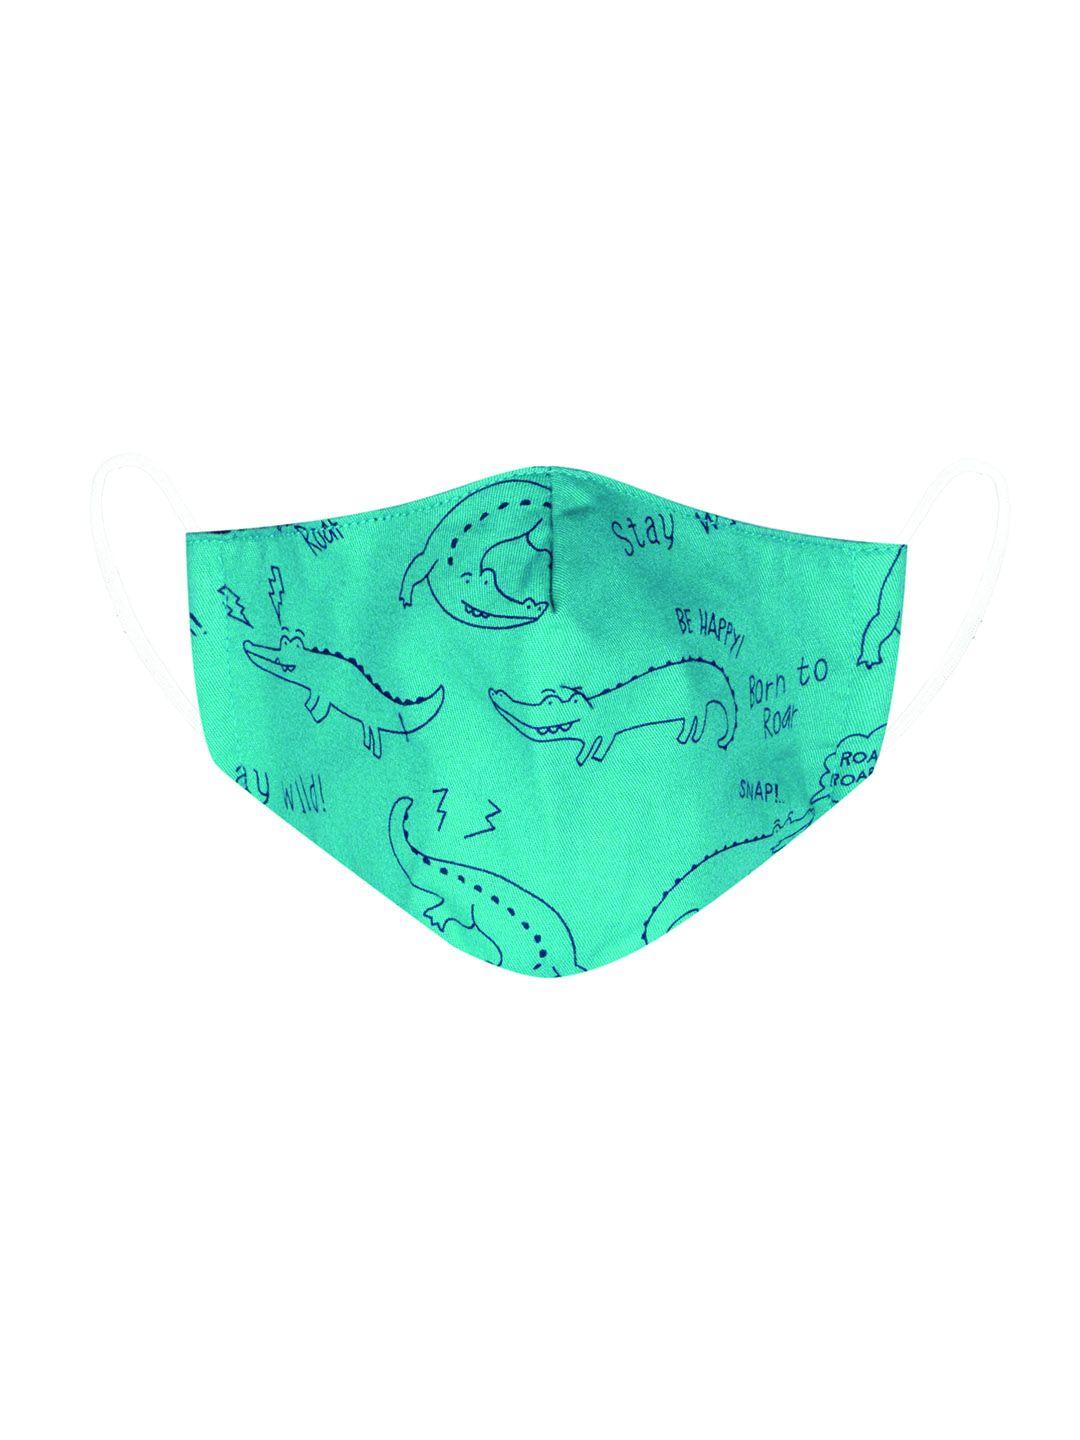 vea kids turquoise blue printed cotton 5 layered filtration face masks